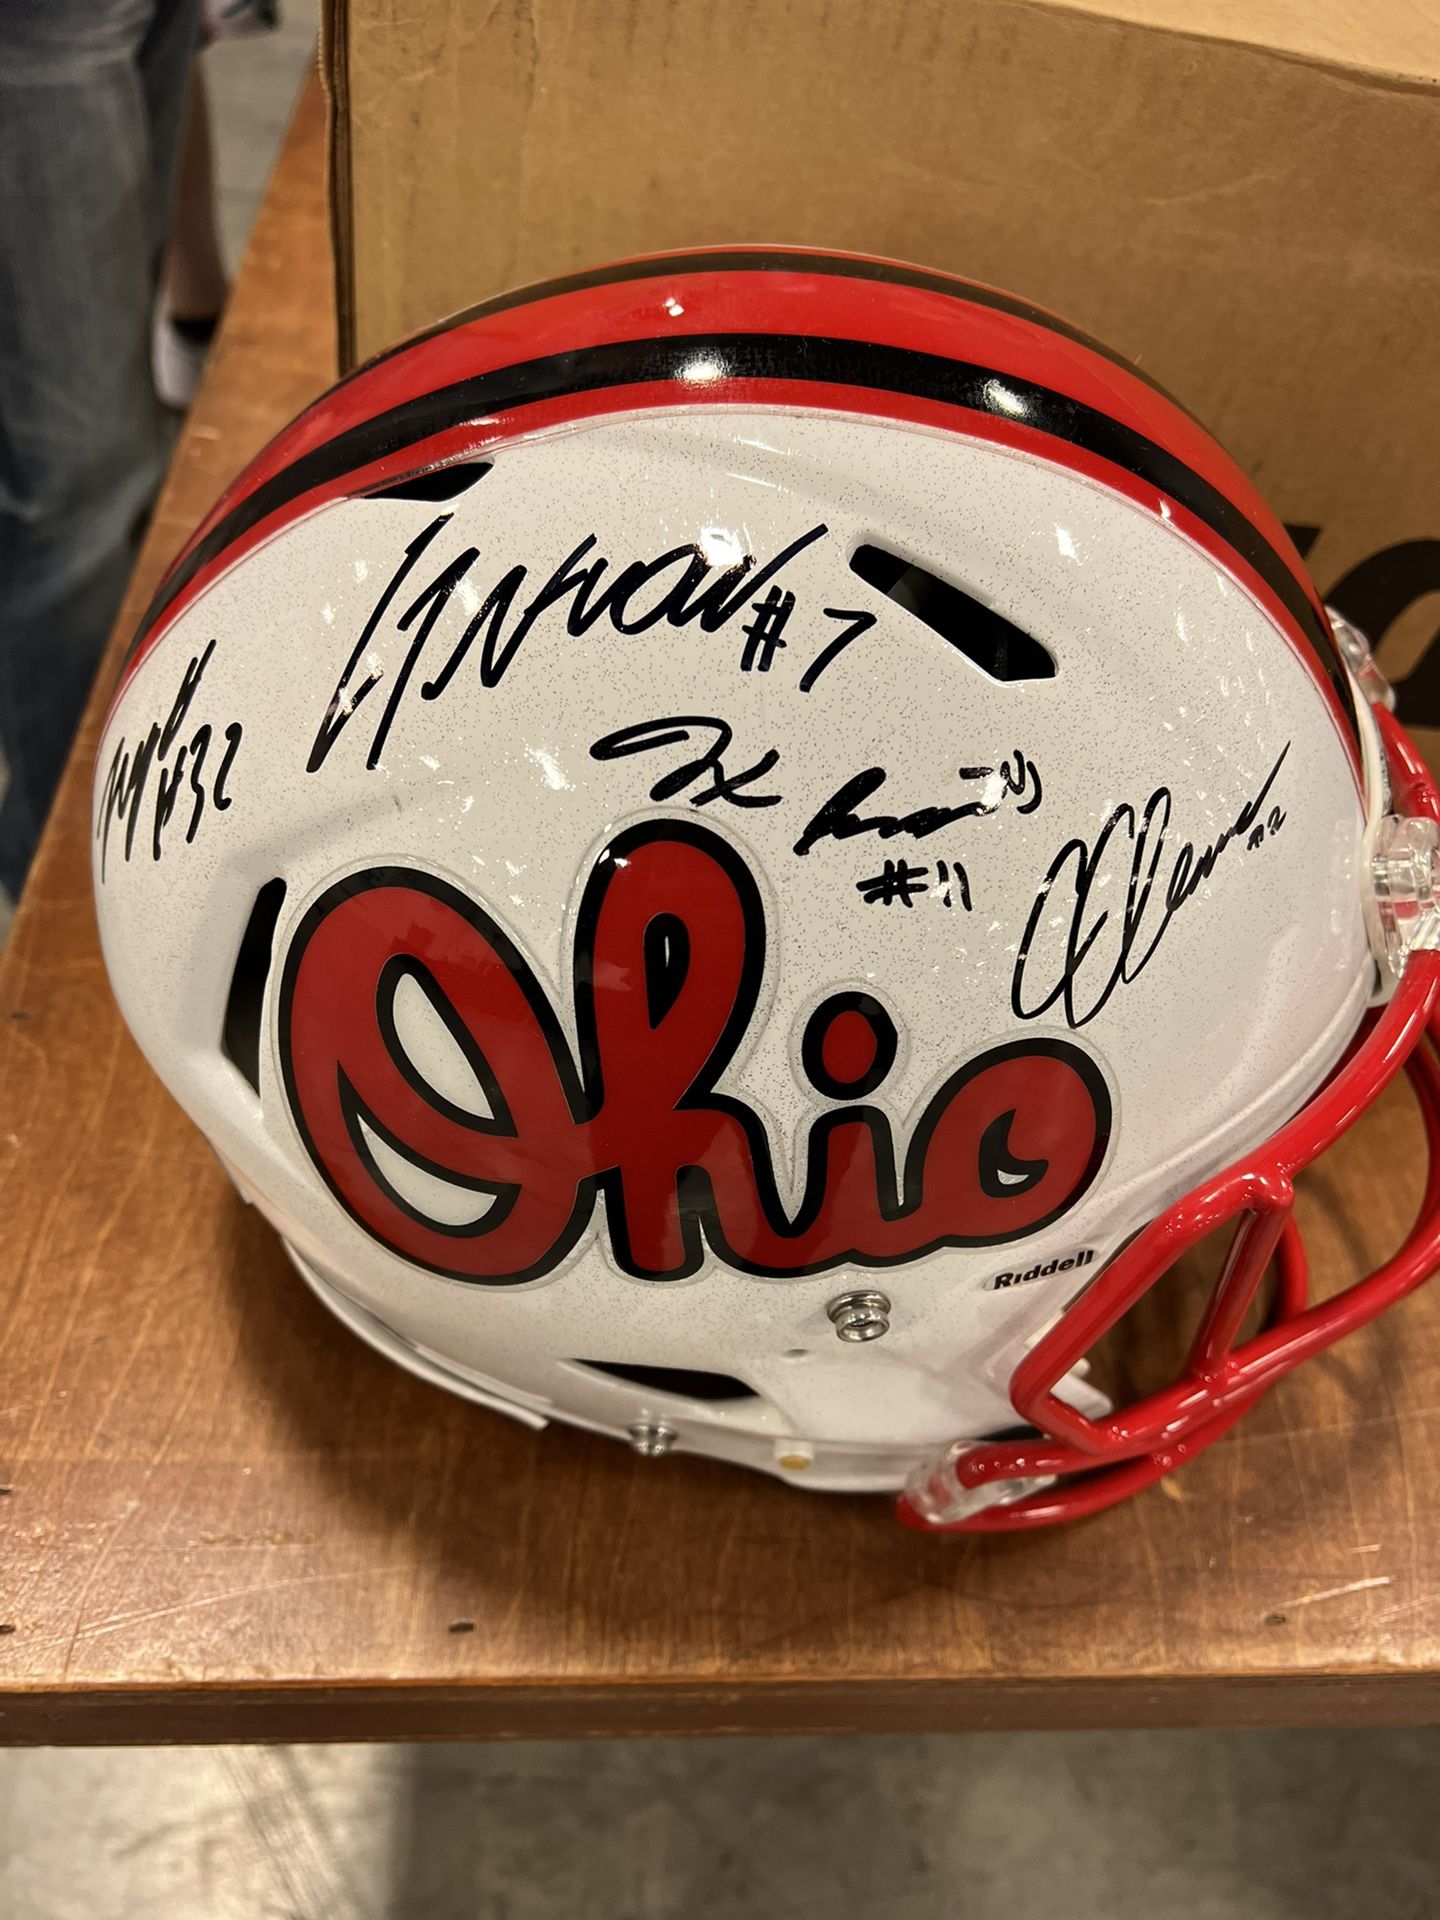 Ohio State Buckeyes Full Sized Authentic Helmet Signed Beckett Authenticated 